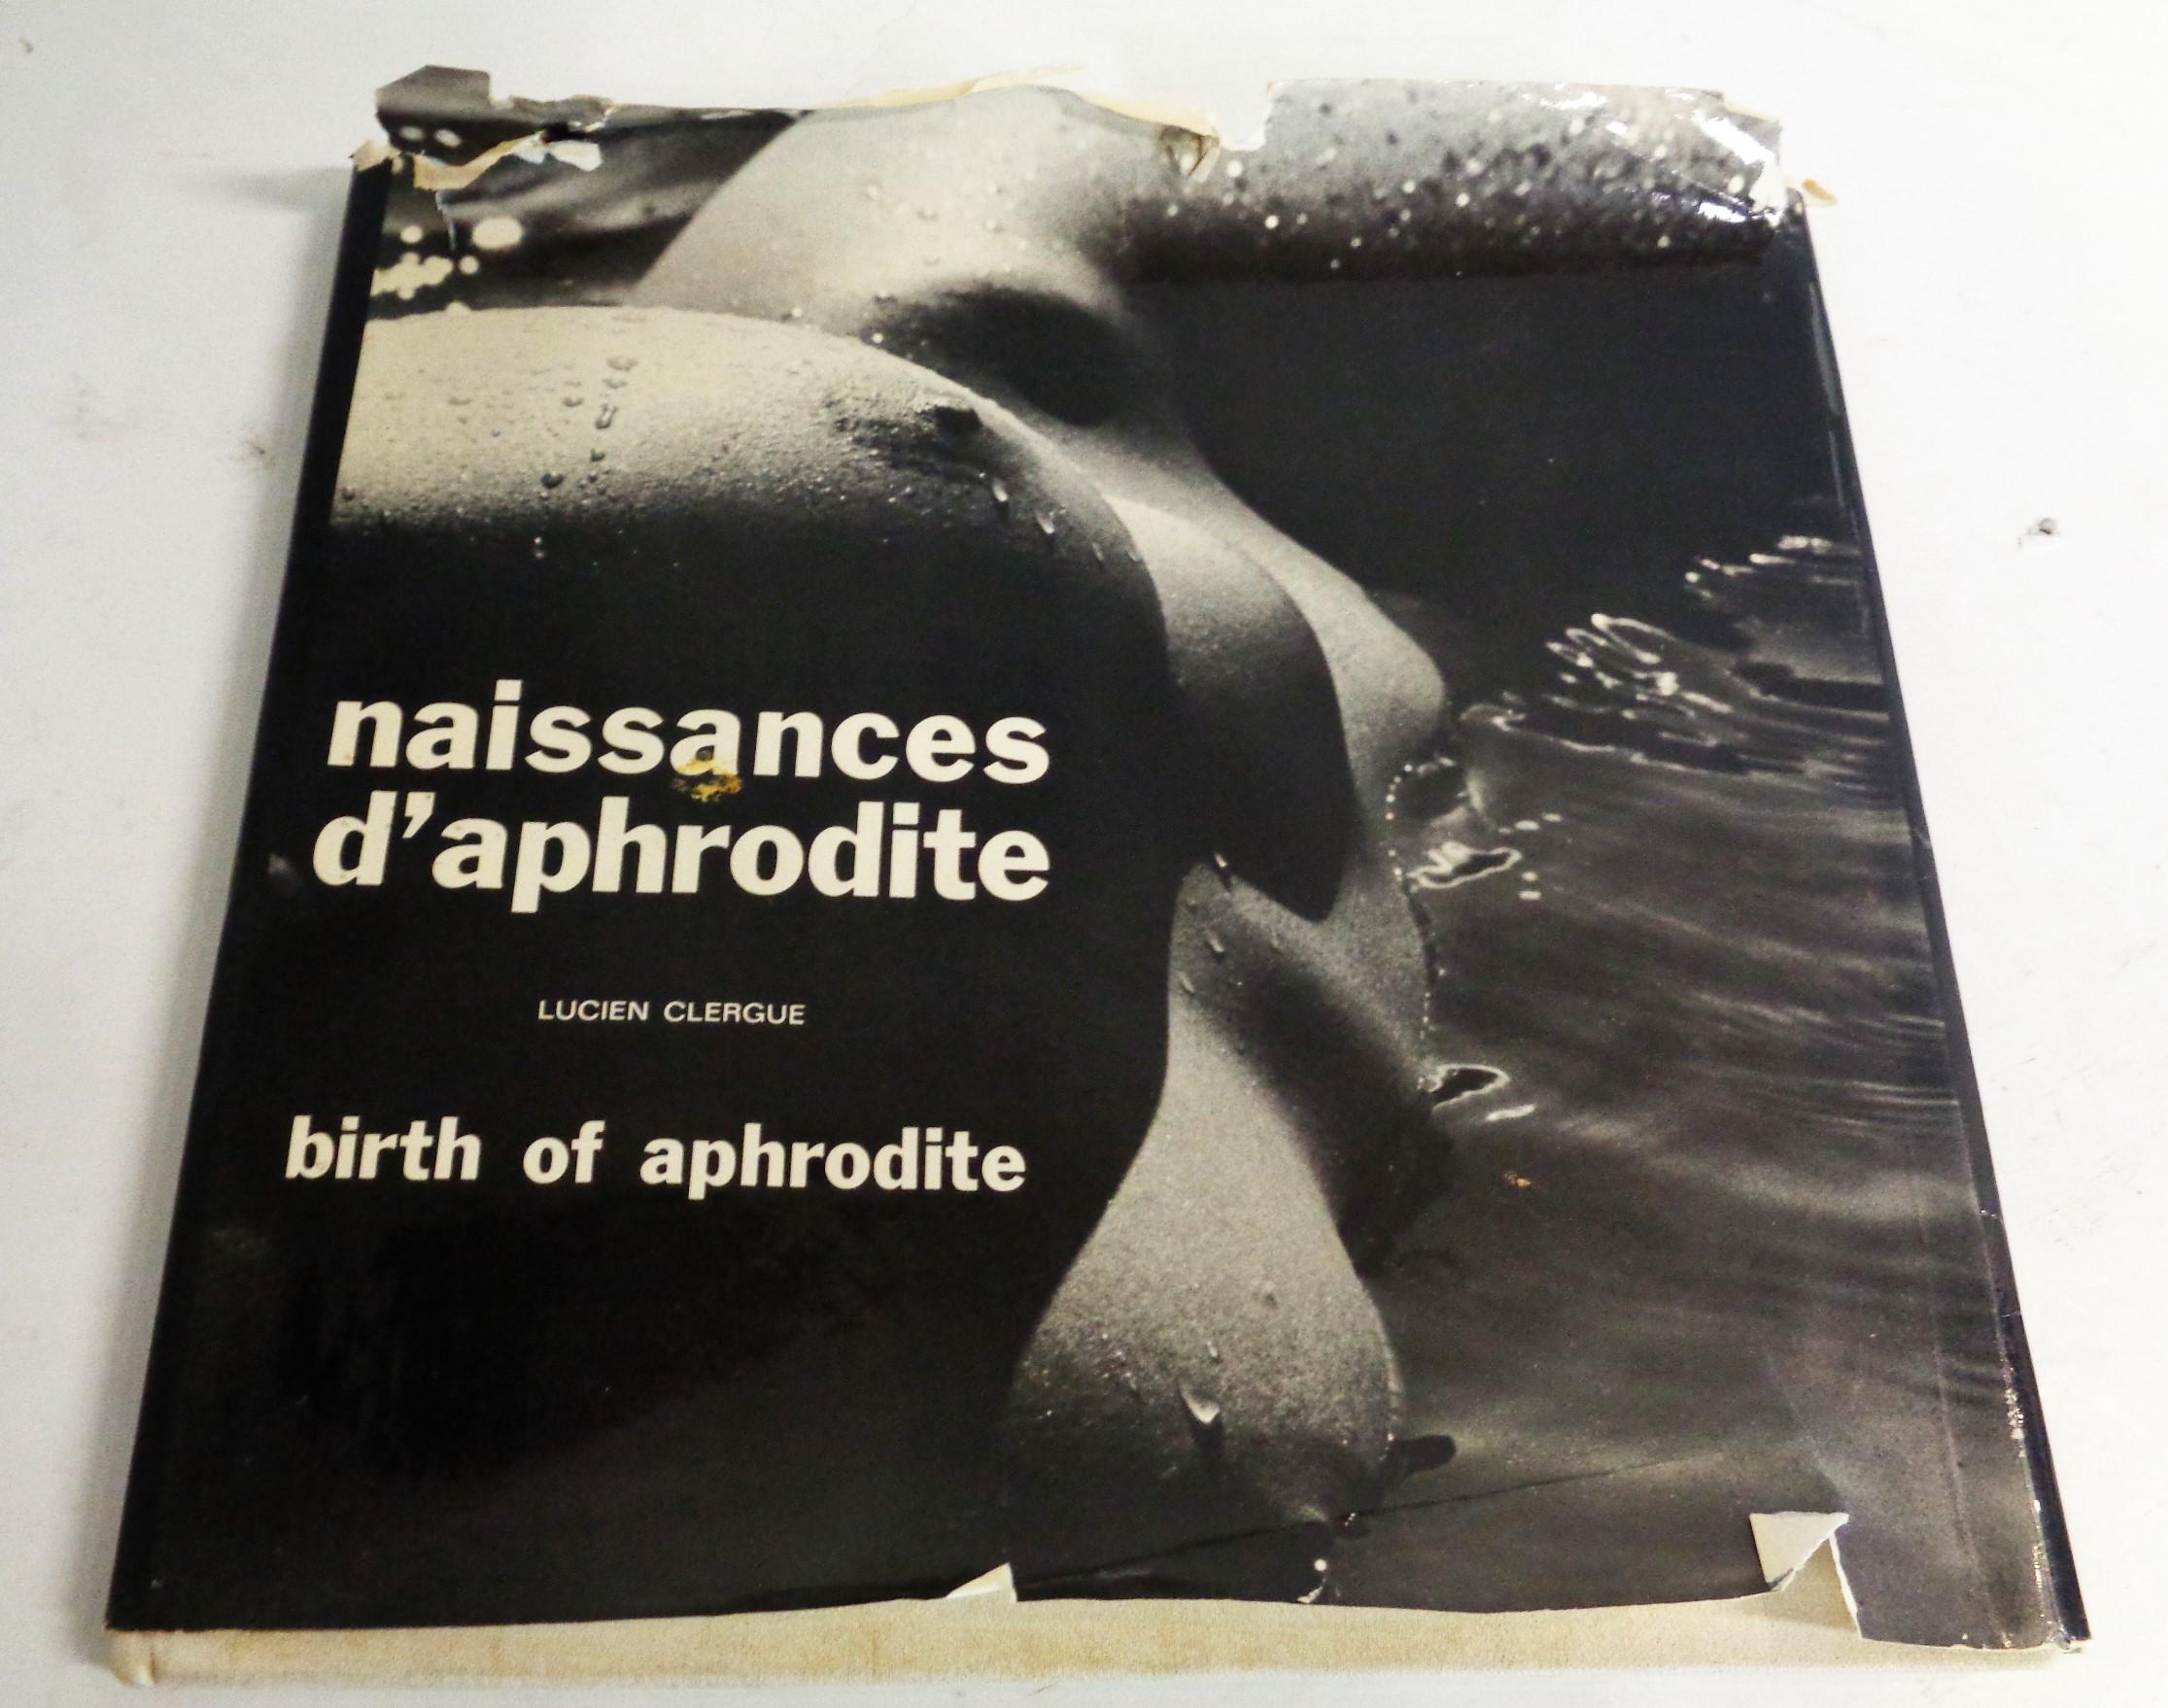 naissances d' aphrodite - LUCIEN CLERGUE - birth of aphrodite - 1966 Brussels & Brussels, New York - Hardcover ivory cloth book w/ black lettering and dust jacket. Exquisite erotic black and white nude photographs by Lucien Clergue w/ text by